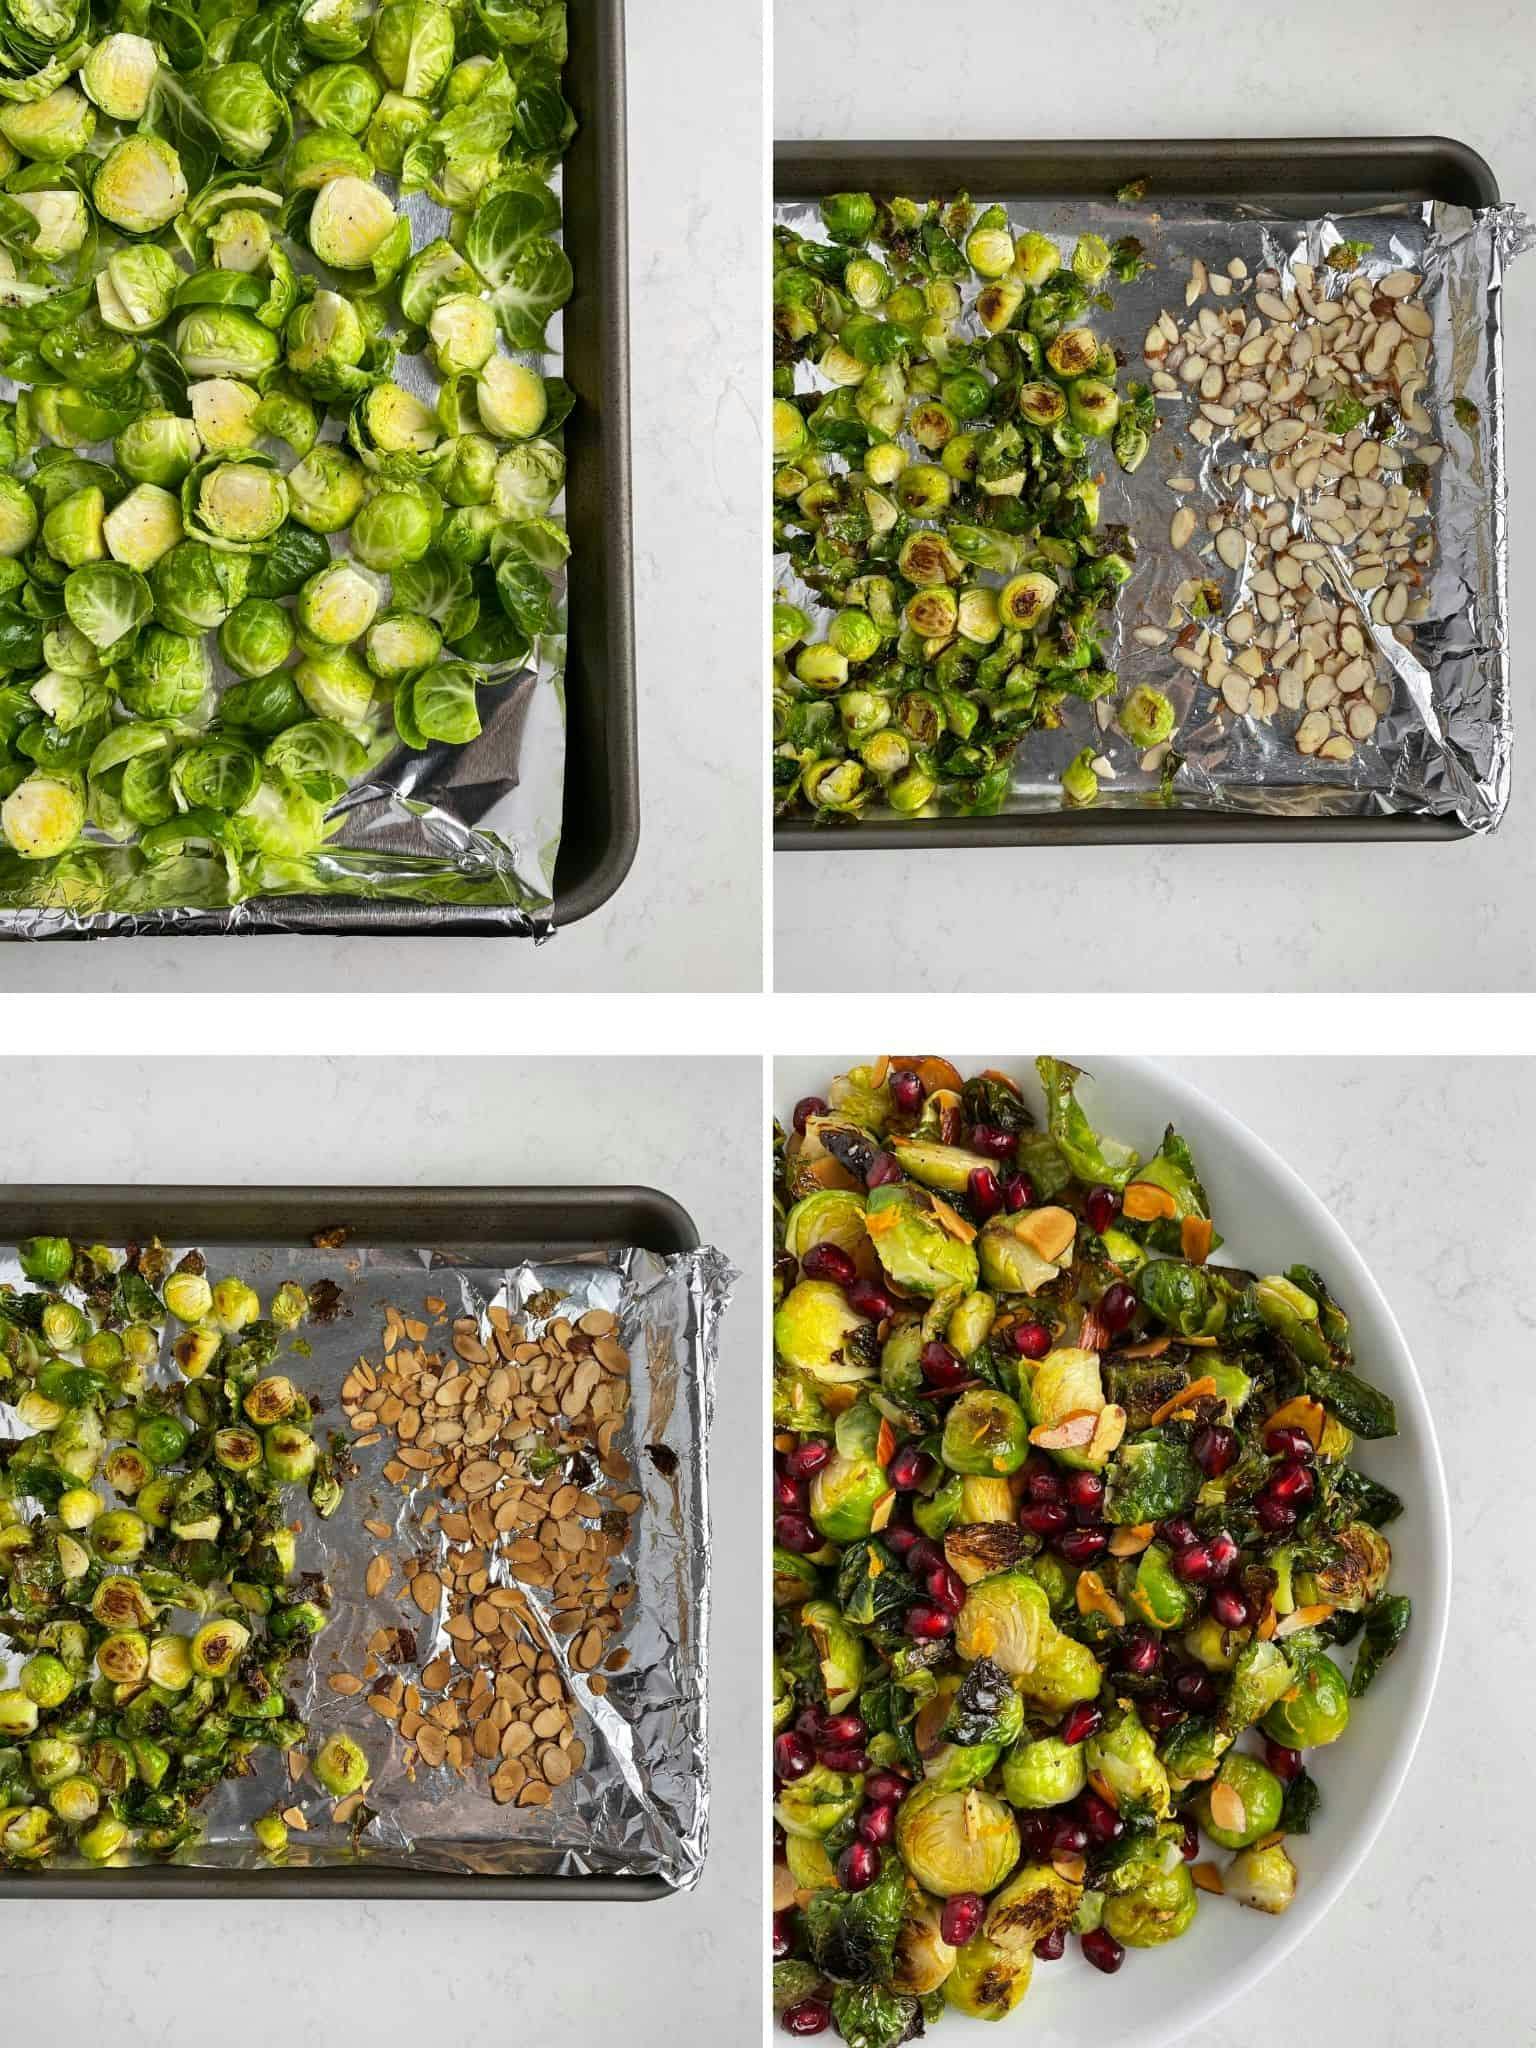 Step by step process of how to make the roasted Brussels sprouts.